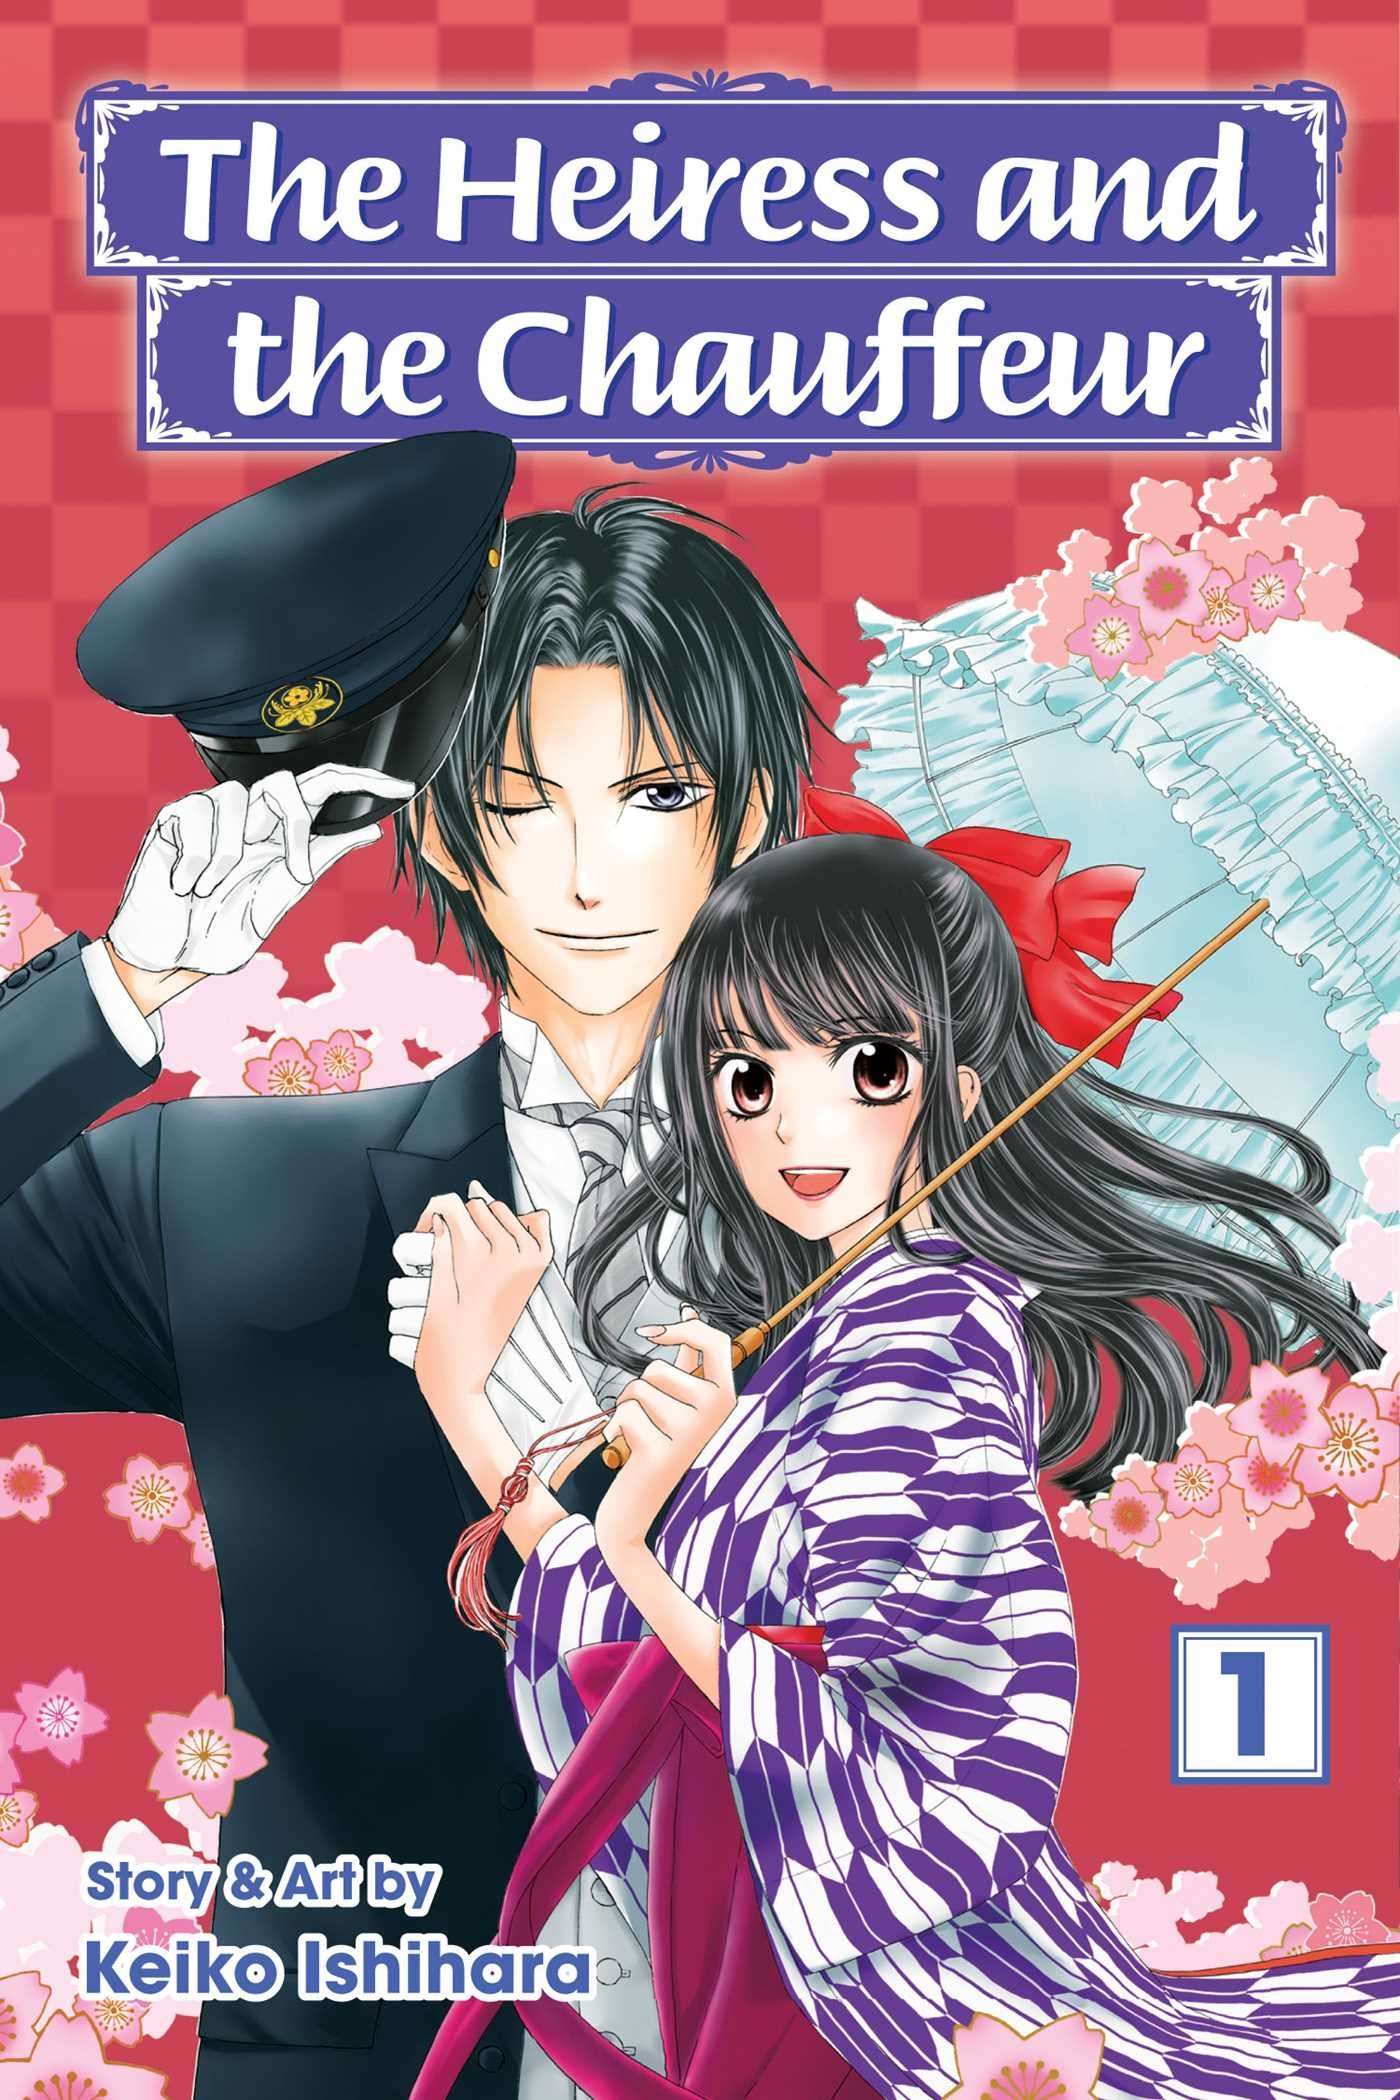 The Heiress and the Chauffeur, Vol. 01